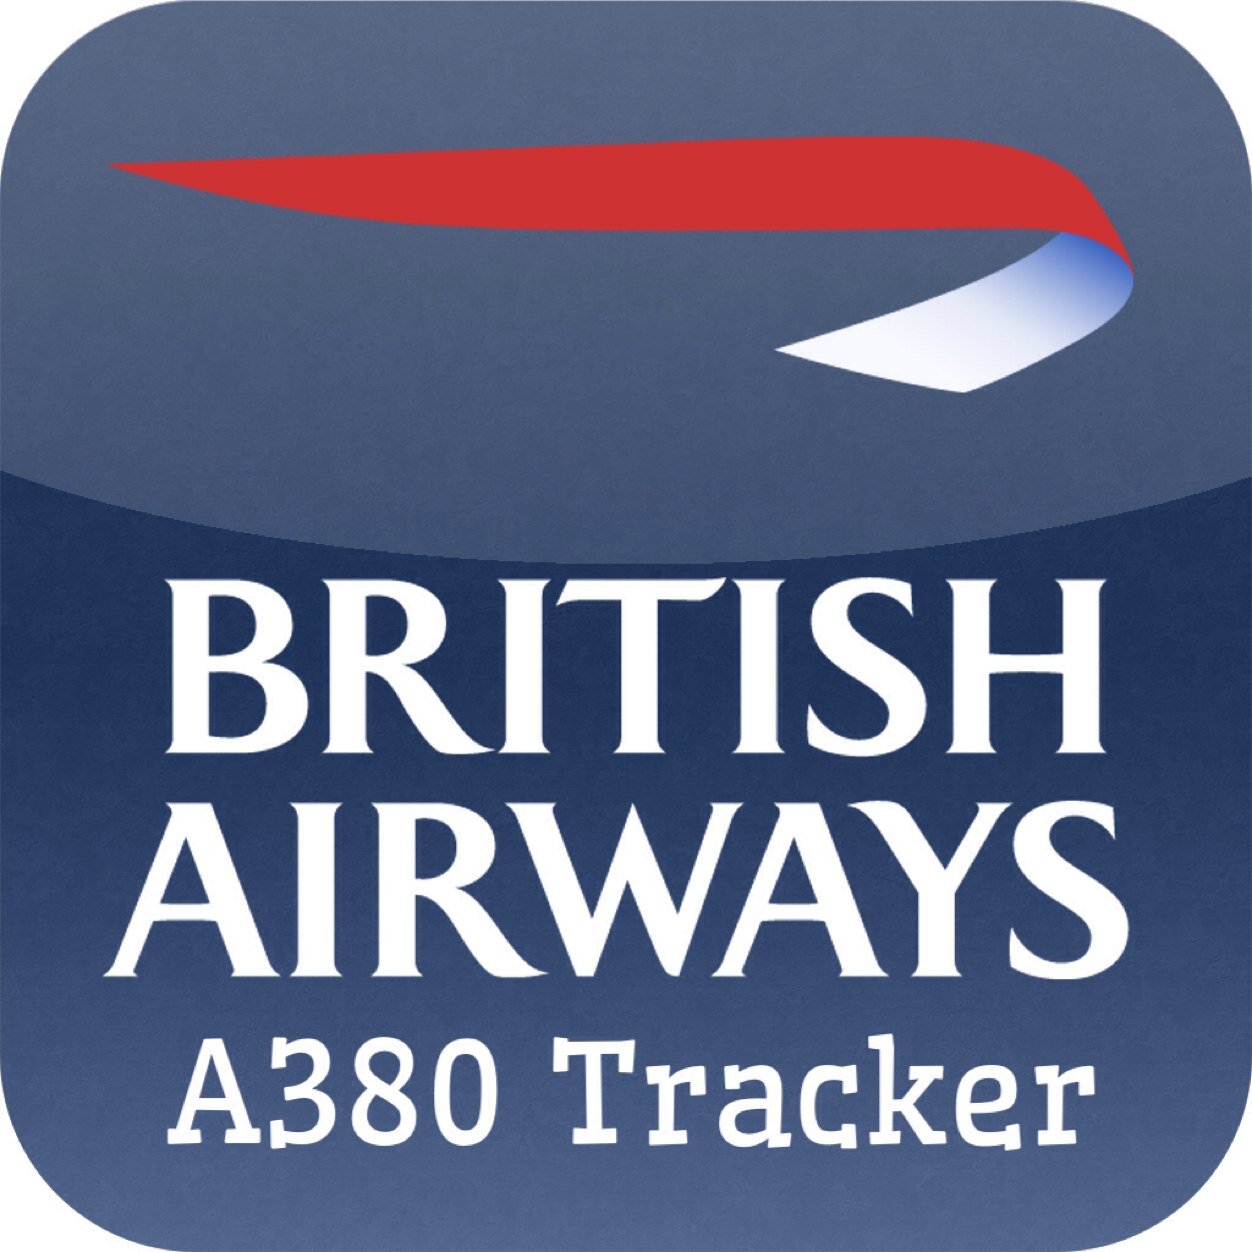 Tracking all of the British Airways A380's - G-XLEA, G-XLEB, G-XLEC, G-XLED, G-XLEE, G-XLEF, G-XLEG, G-XLEH, G-XLEI